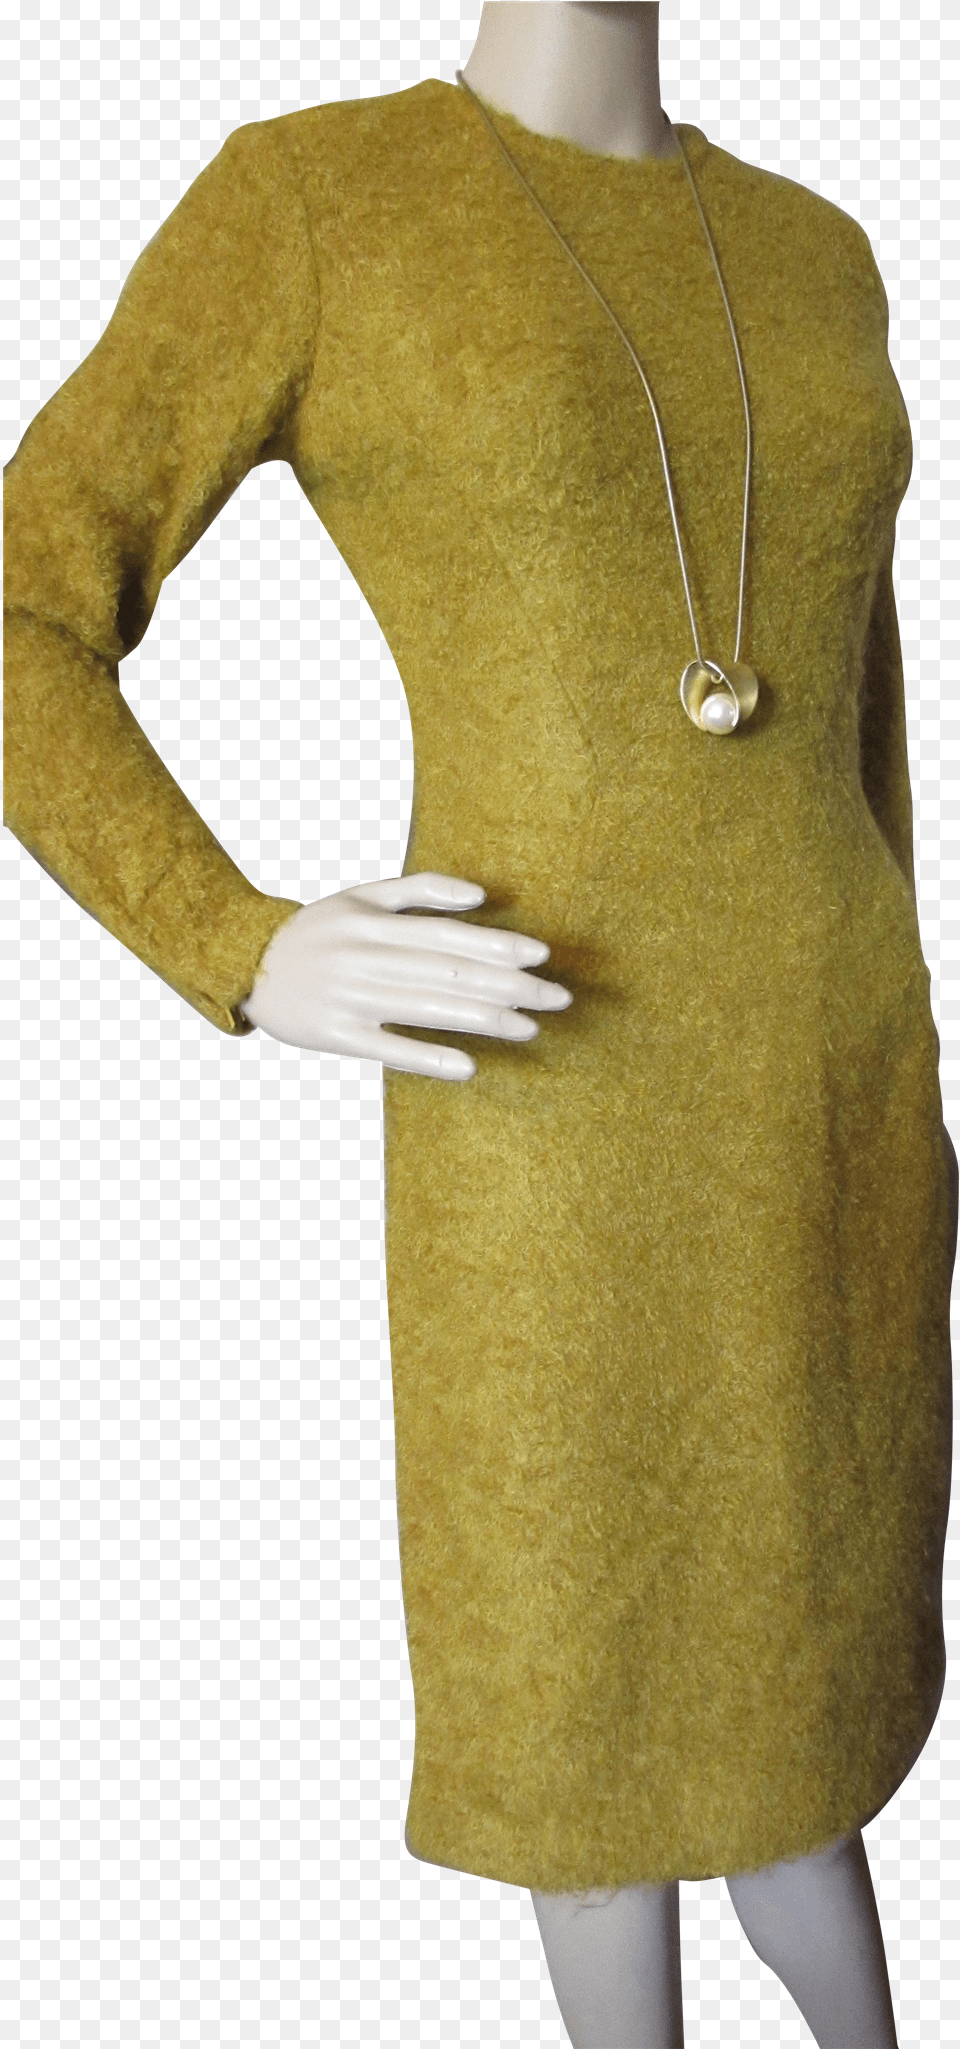 Day Dress, Accessories, Necklace, Jewelry, Glove Png Image